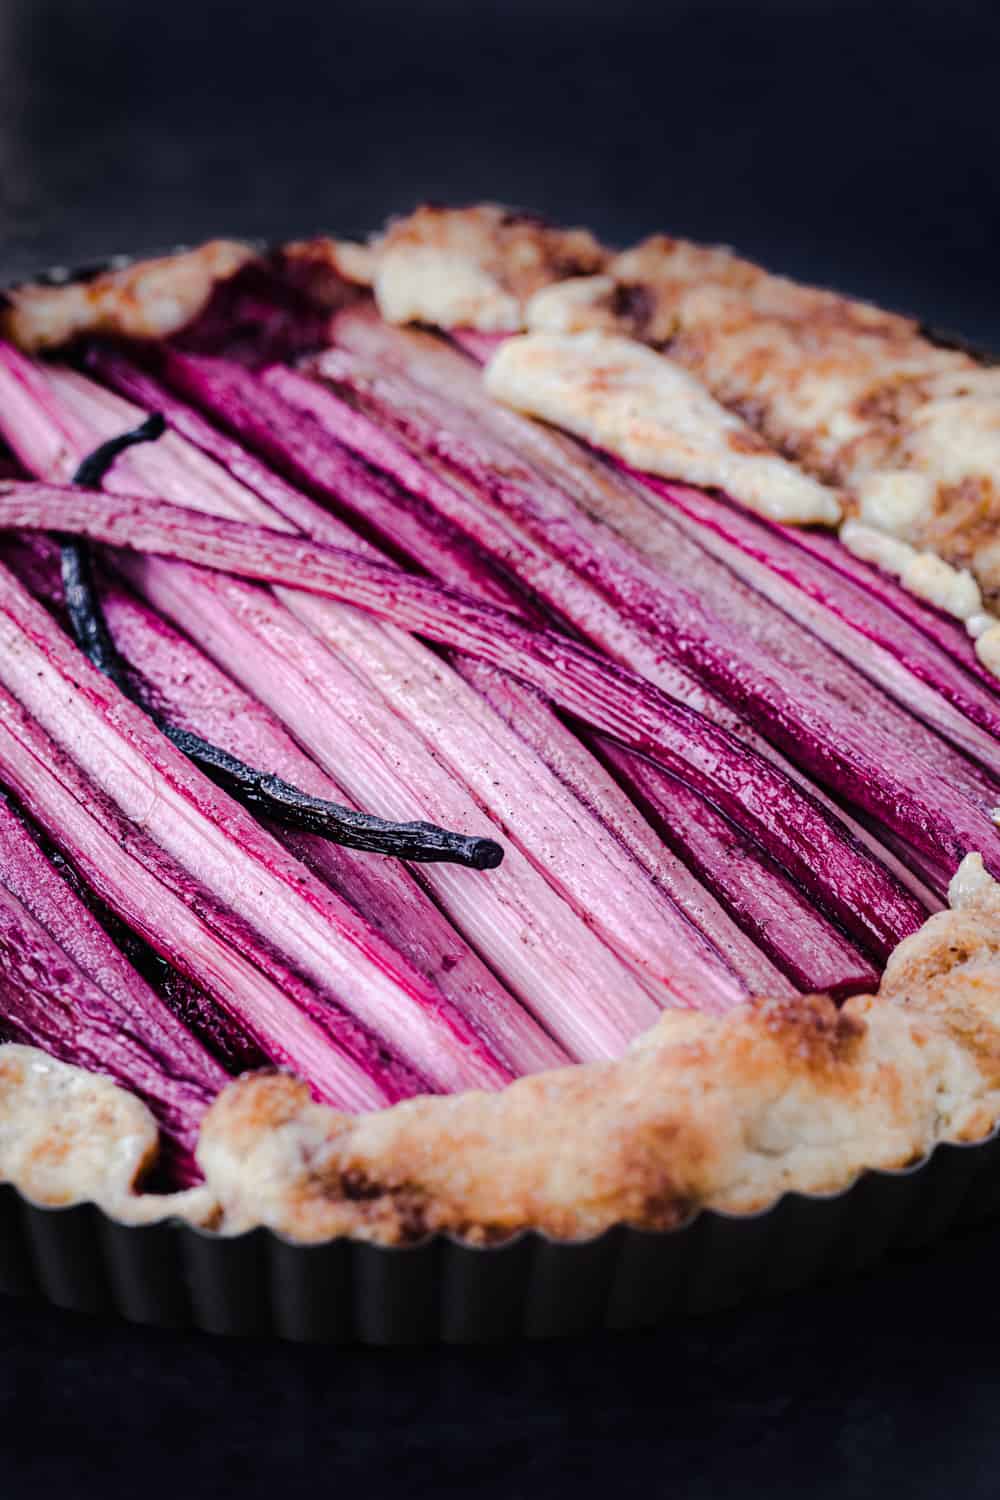 Rhubarb galette up close and side angle shot; can really see the texture of the vibrant pink rhubarb stalks.